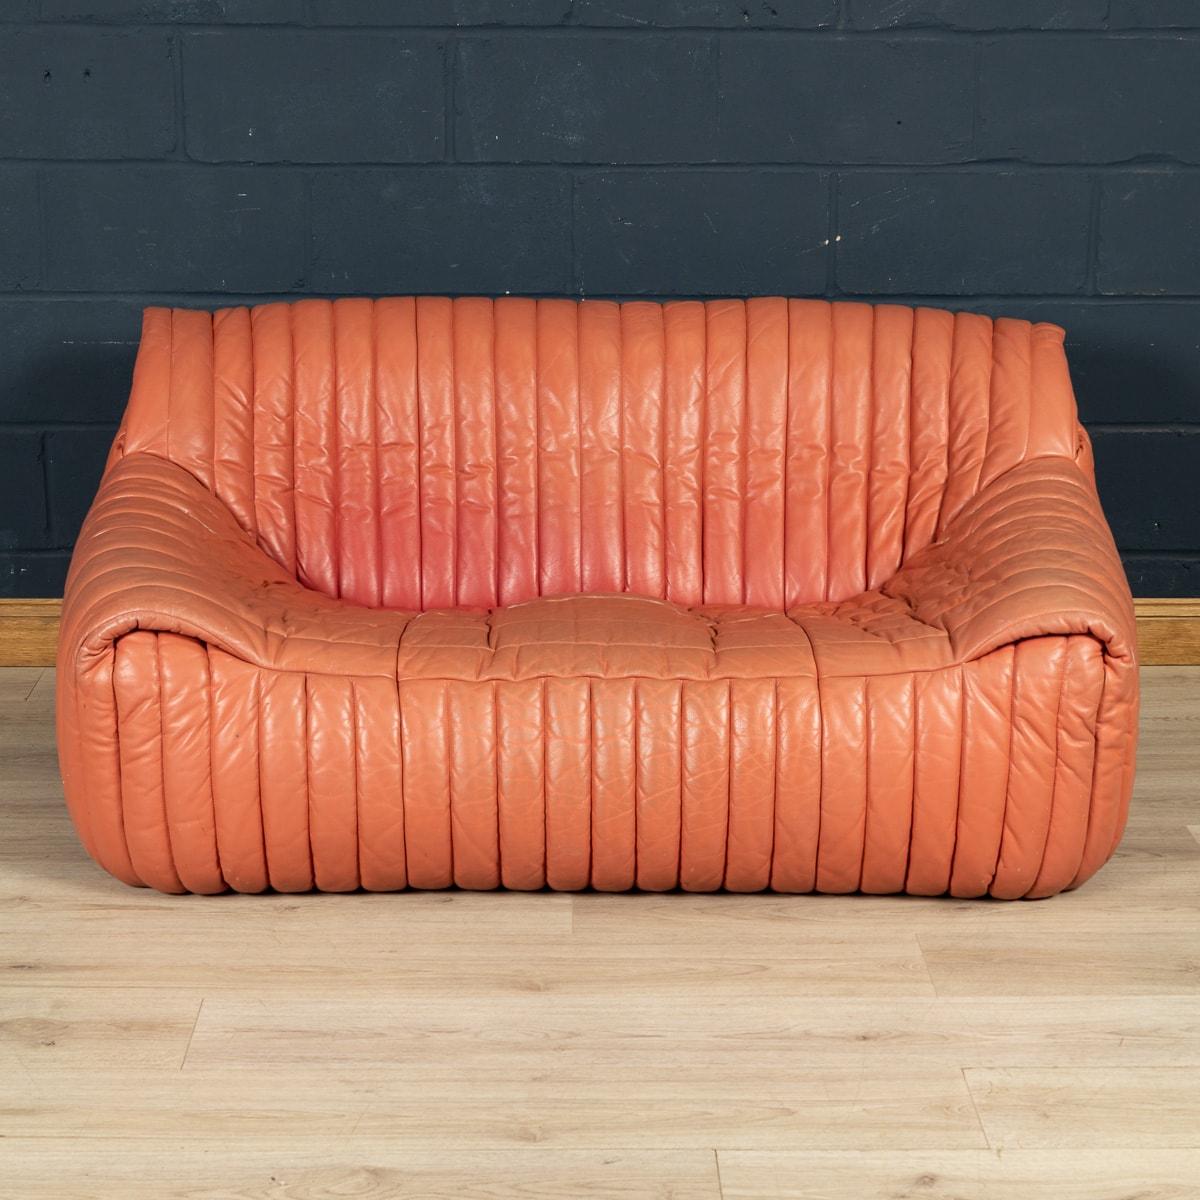 An iconic 1970s design, the Sandra sofa was designed by Annie Hiéronimus for Cinna after she joined the Roset Bureau d'Etudes in 1976. Constructed from foam, this two-seater sofa has a solid form which is fully upholstered in soft off-red ribbed